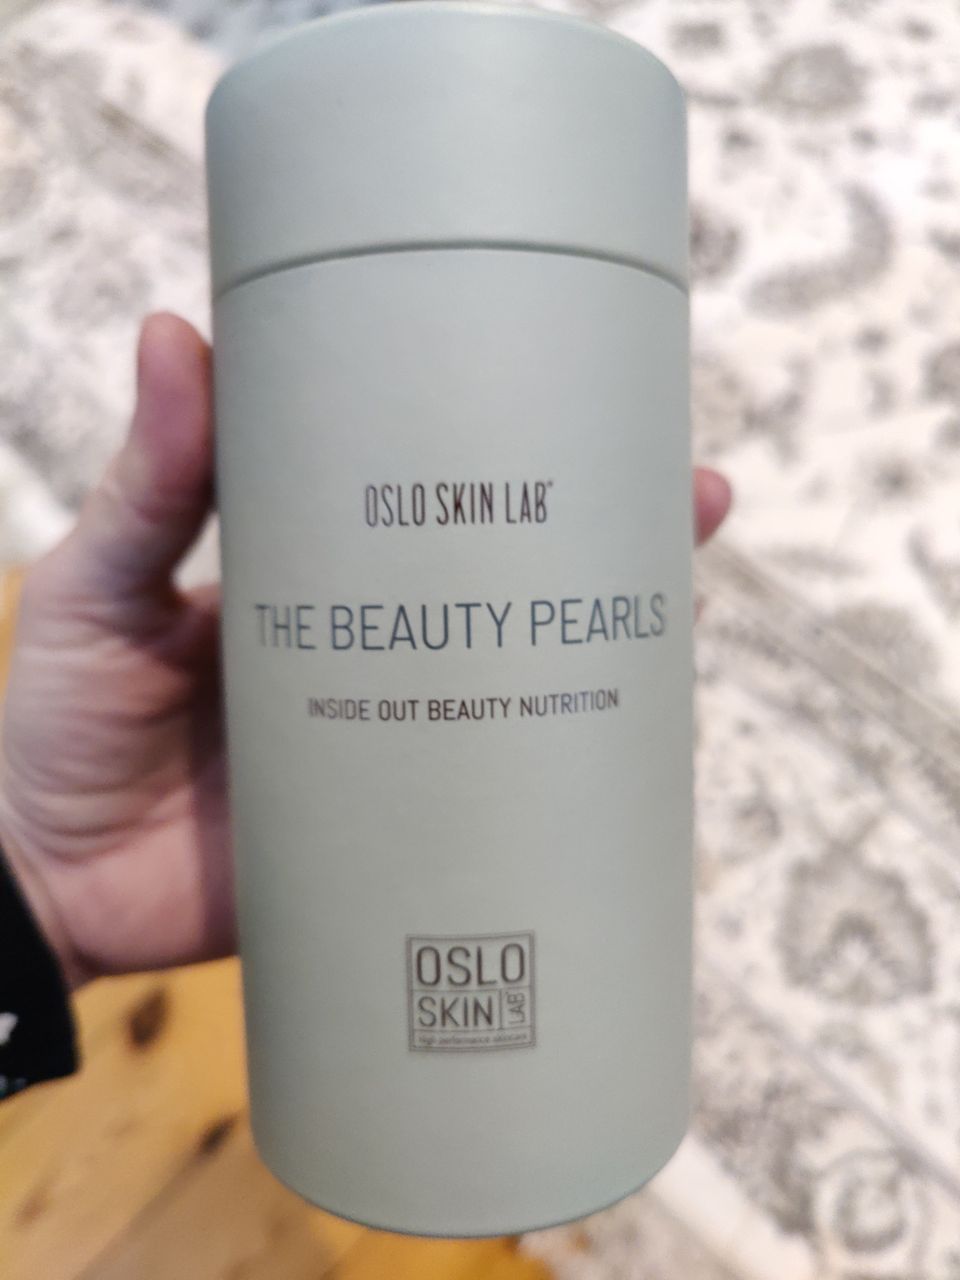 Oslo skin lab, the beauty pearls